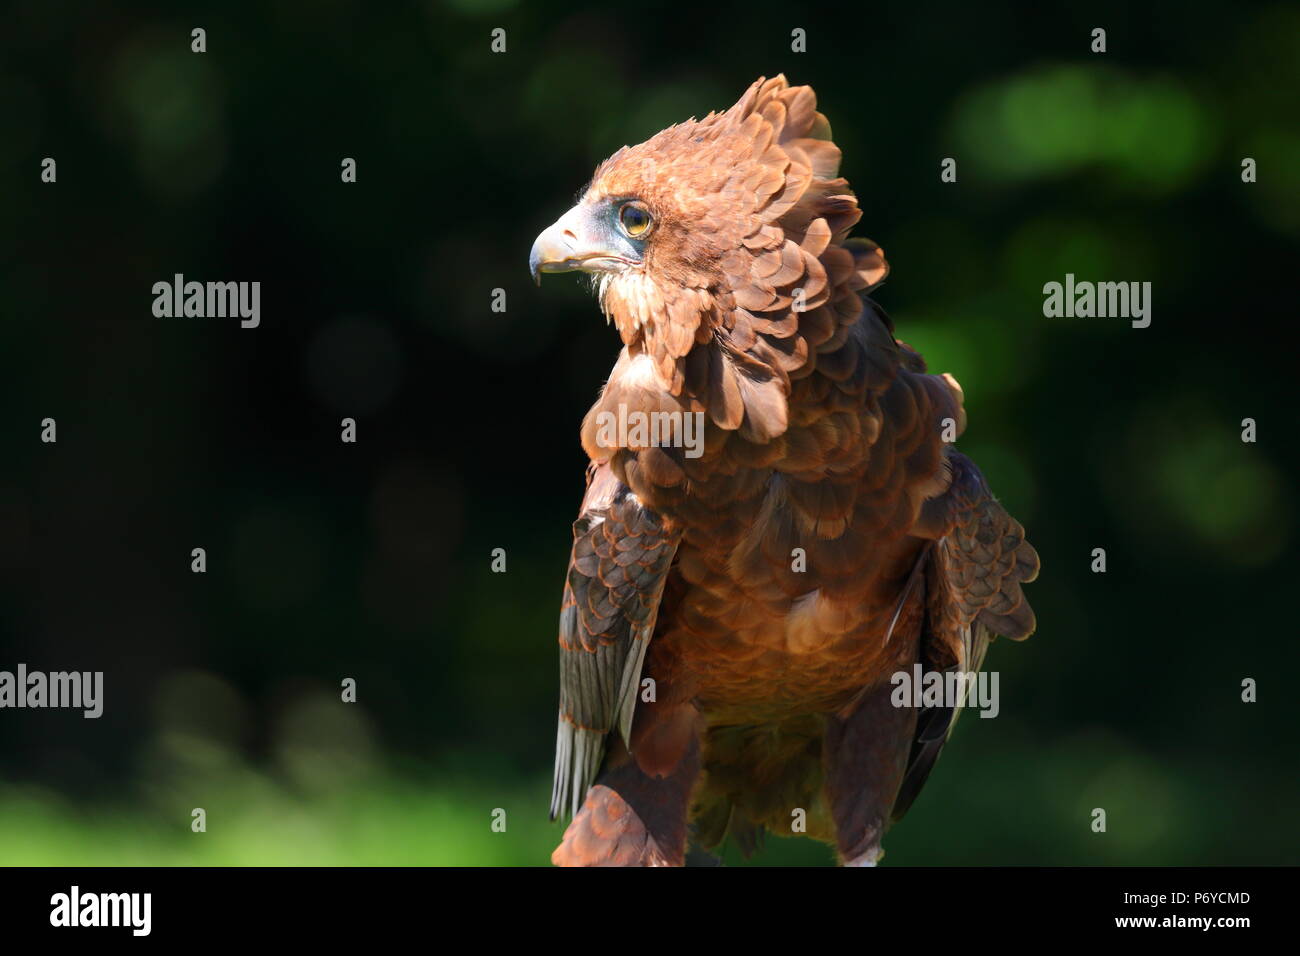 A Bachelor Eagle at Paradise Park in Hayle, Cornwall on display at one of their Eagle shows. Stock Photo